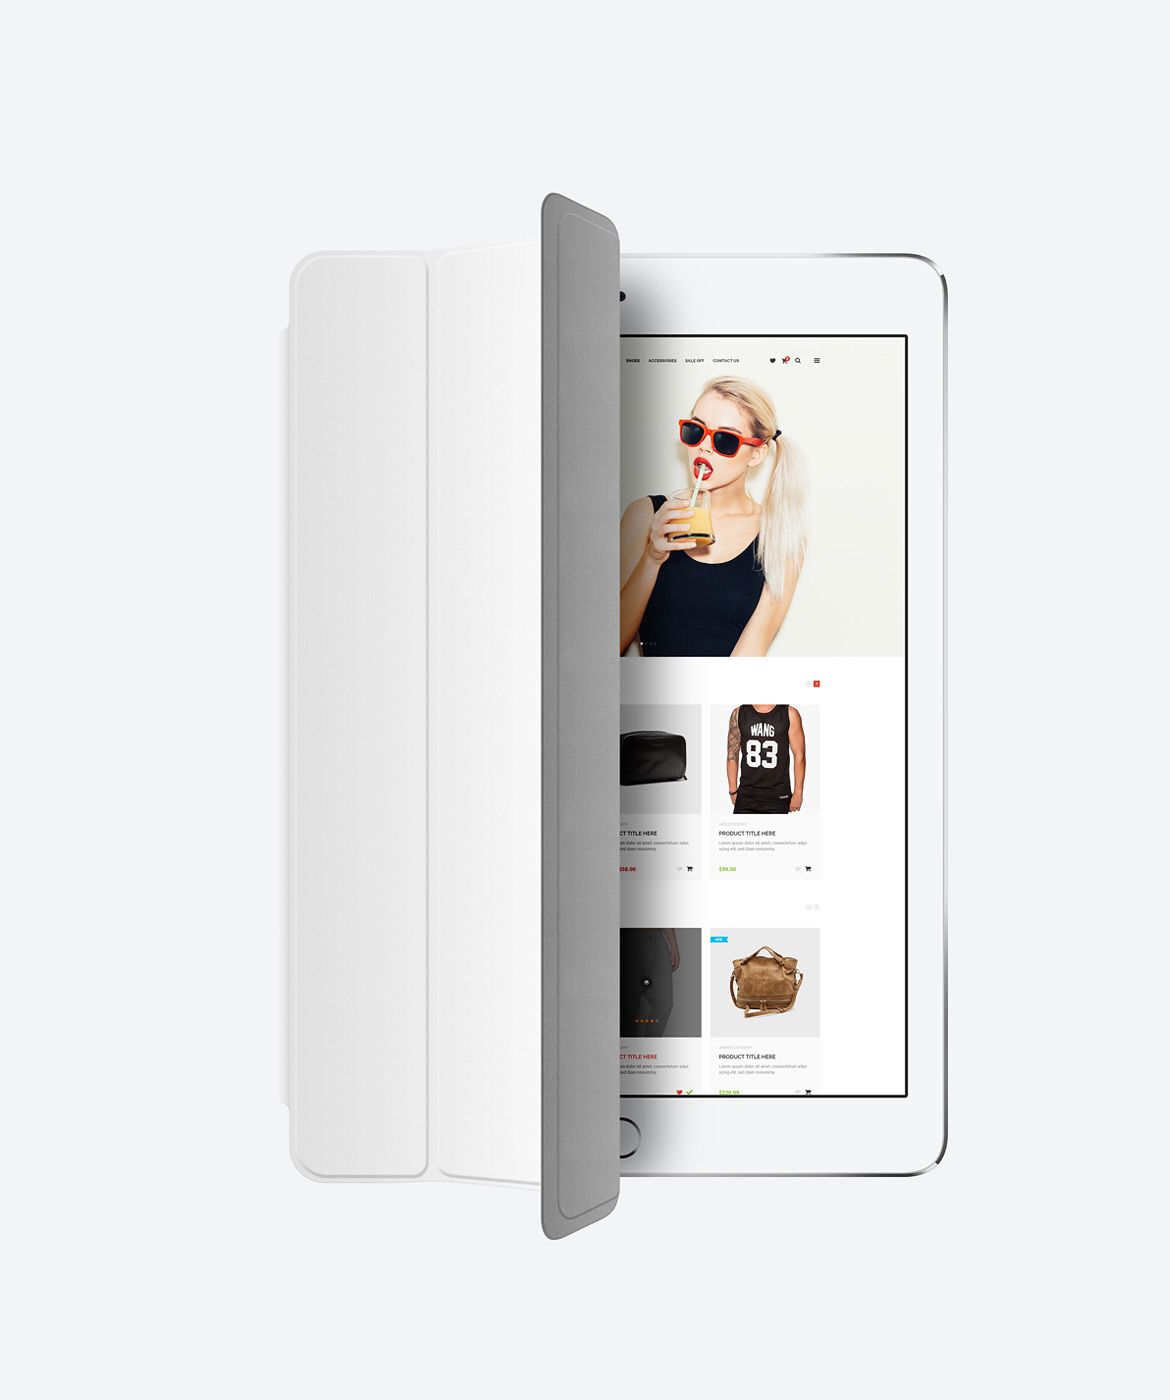 iPad-Air-2-whit-Smartcover-Mockup_modern